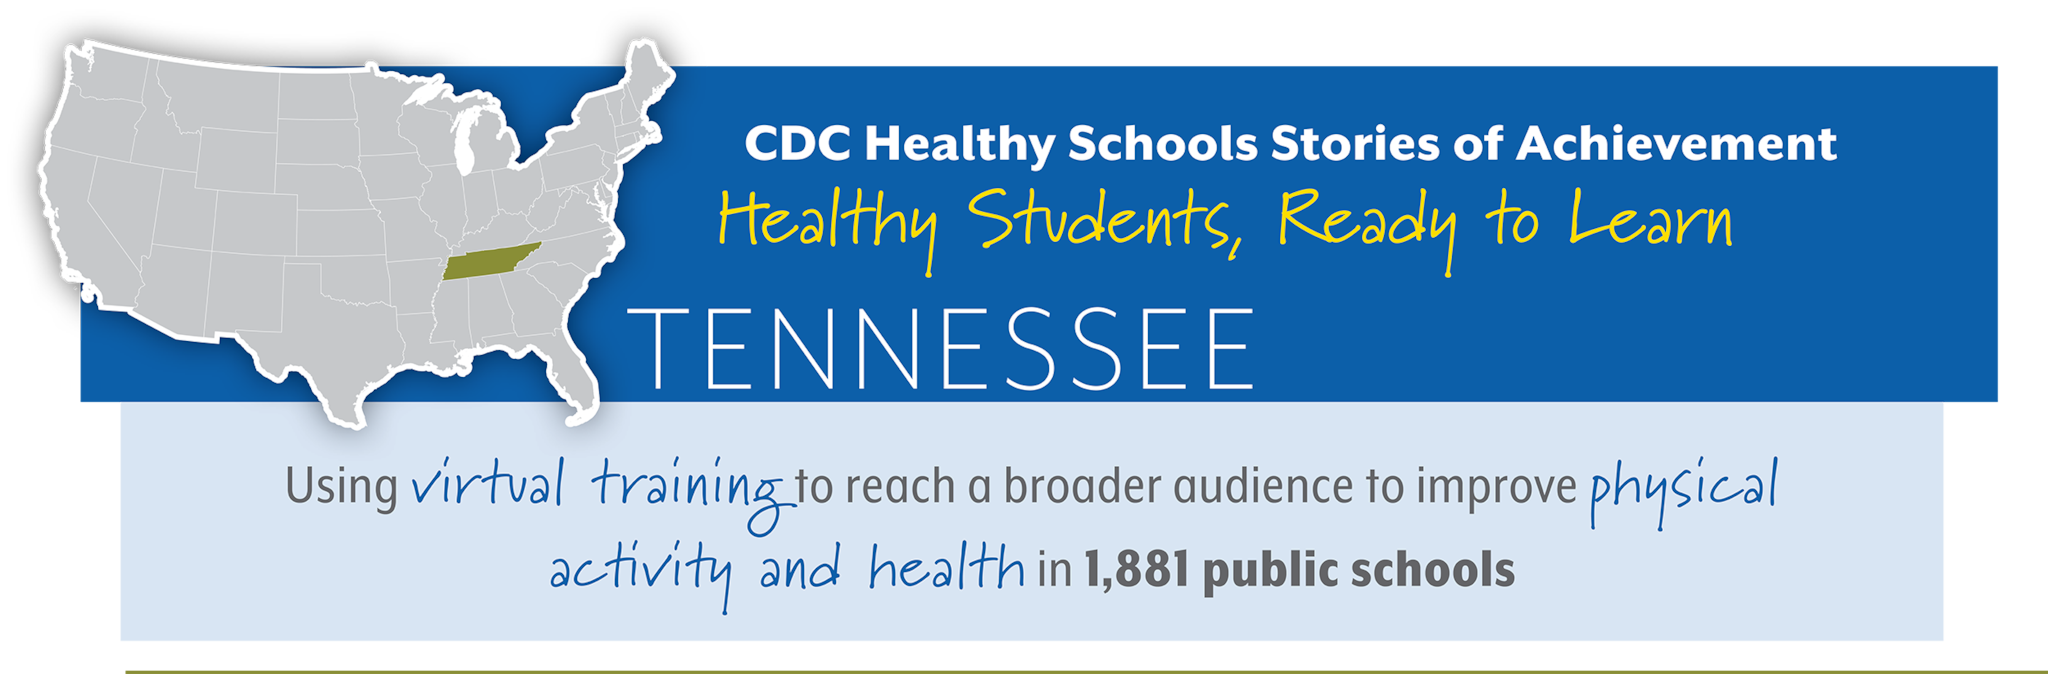 CDC Healthy Schools Stories of Achievement  Healthy Students, Ready to Learn  TENNESSEE Using virtual training to reach a broader audience to improve physical  actvit and health in 1,881 public schools